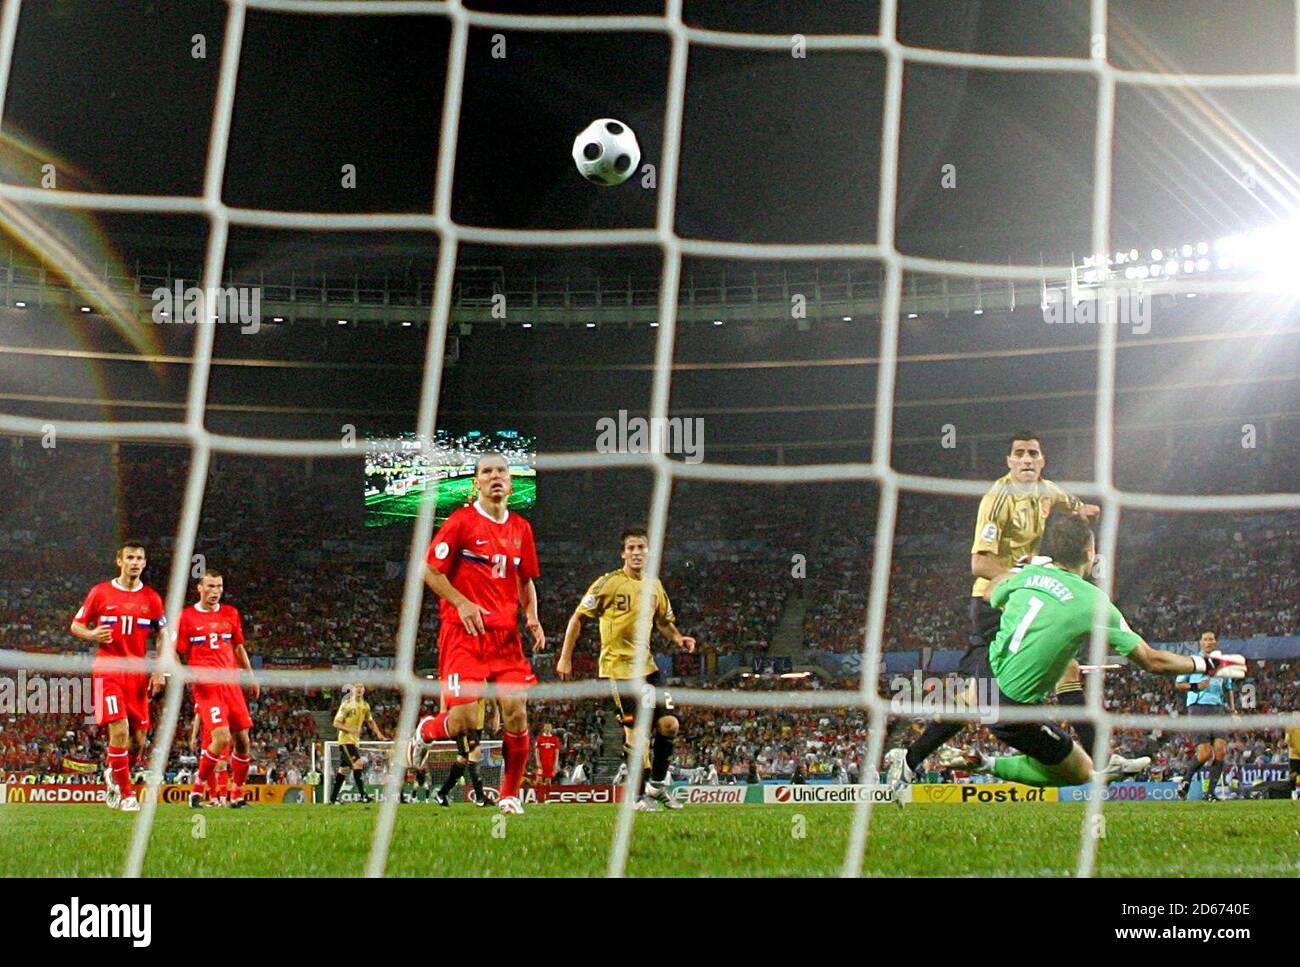 Spain's Daniel Guiza (2nd right) chips over Russia's goalkeeper Igor Akinfeev (r) to score Spain's second goal of the game Stock Photo